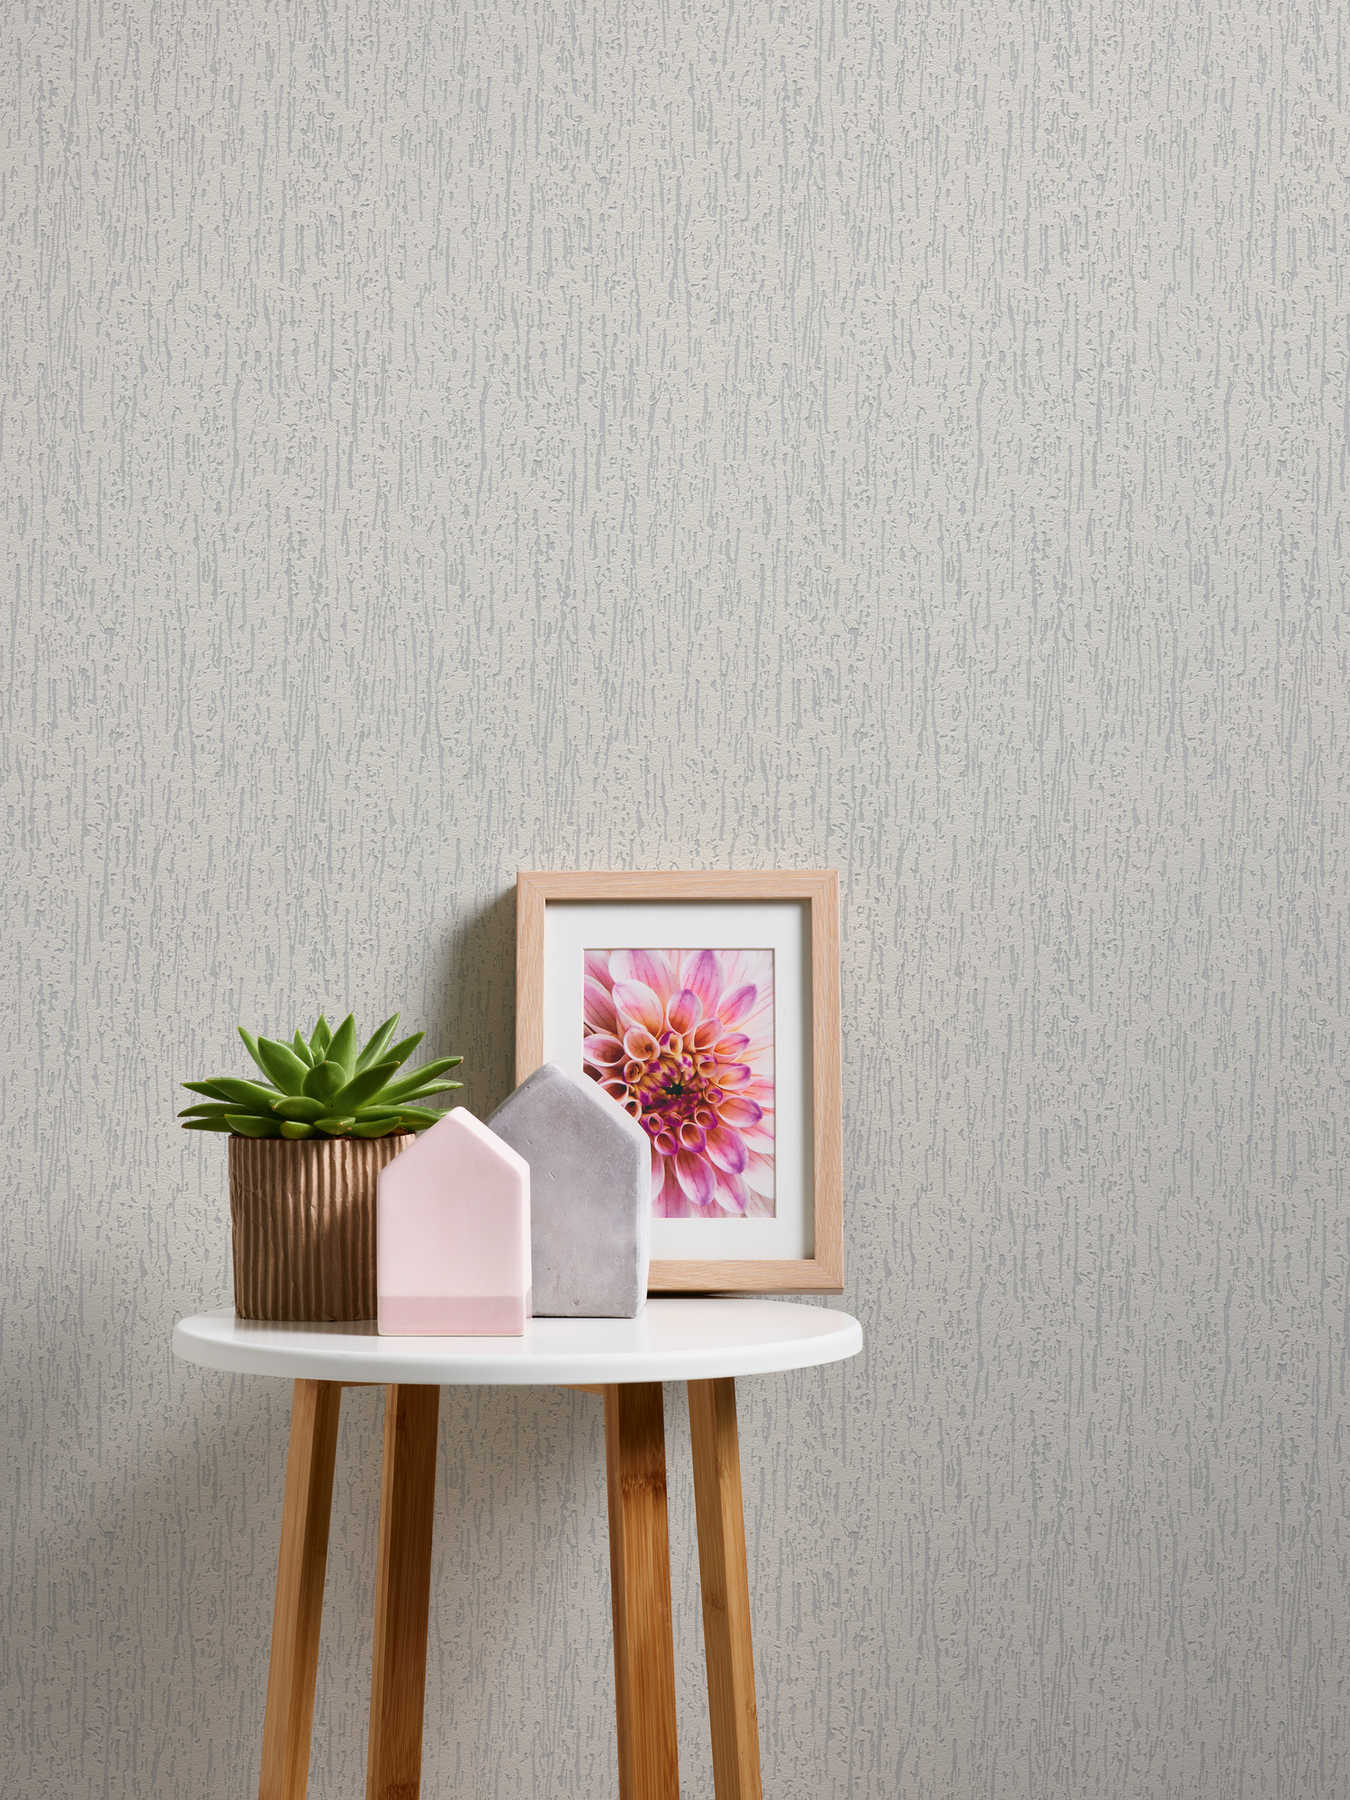             Paintable non-woven wallpaper in roughcast look - Paintable, White
        